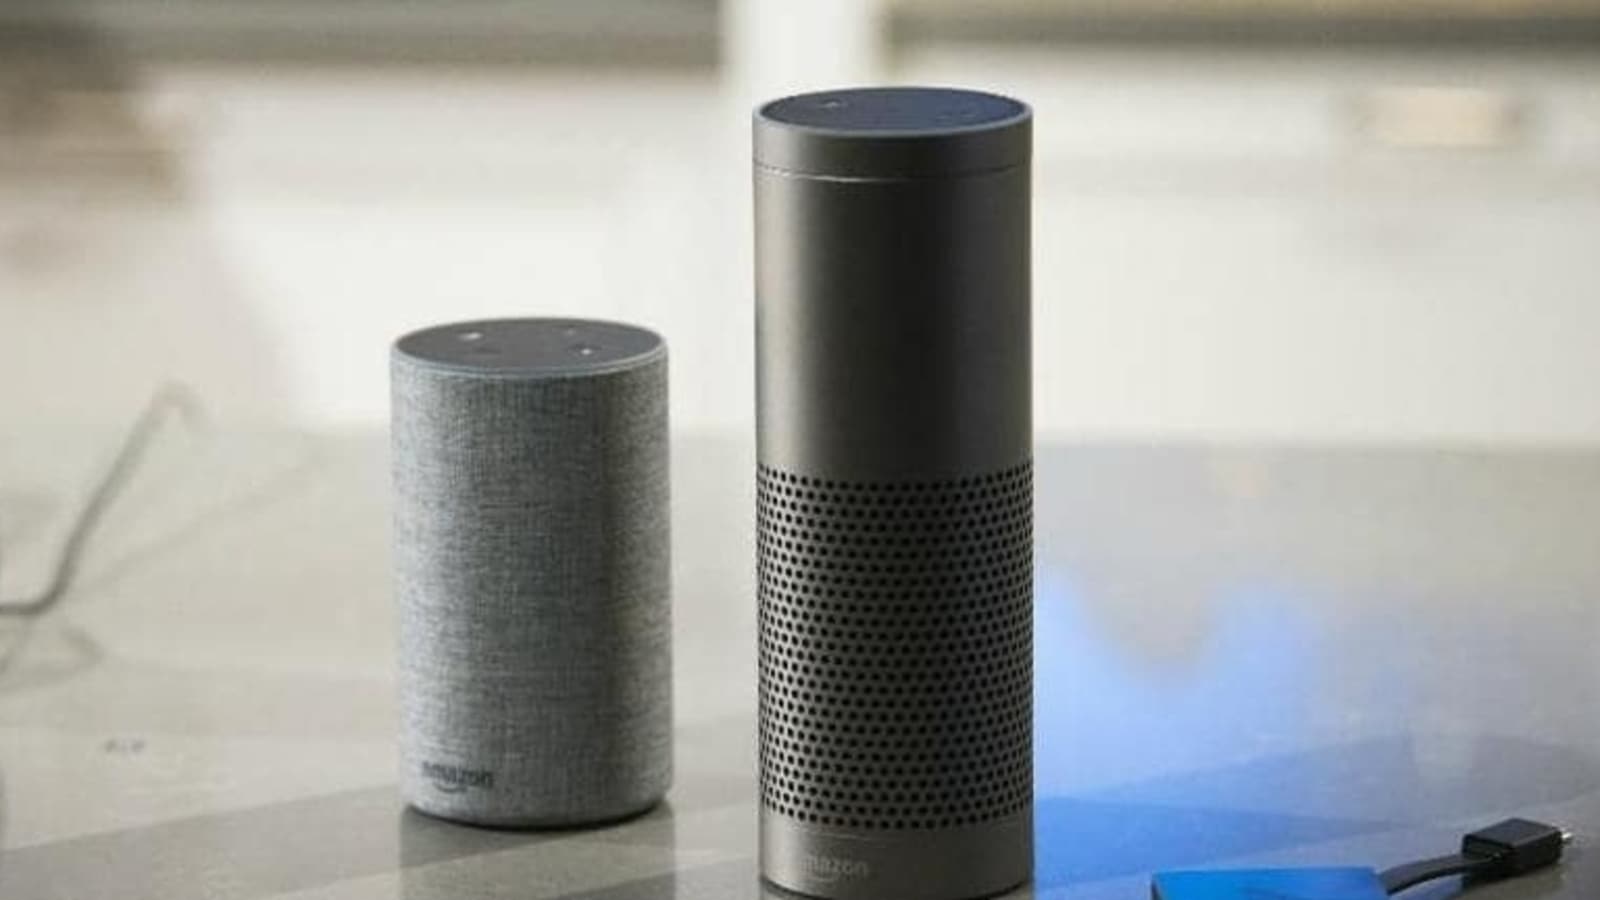 Reuters to support  Alexa with election results information for U.S.  midterms